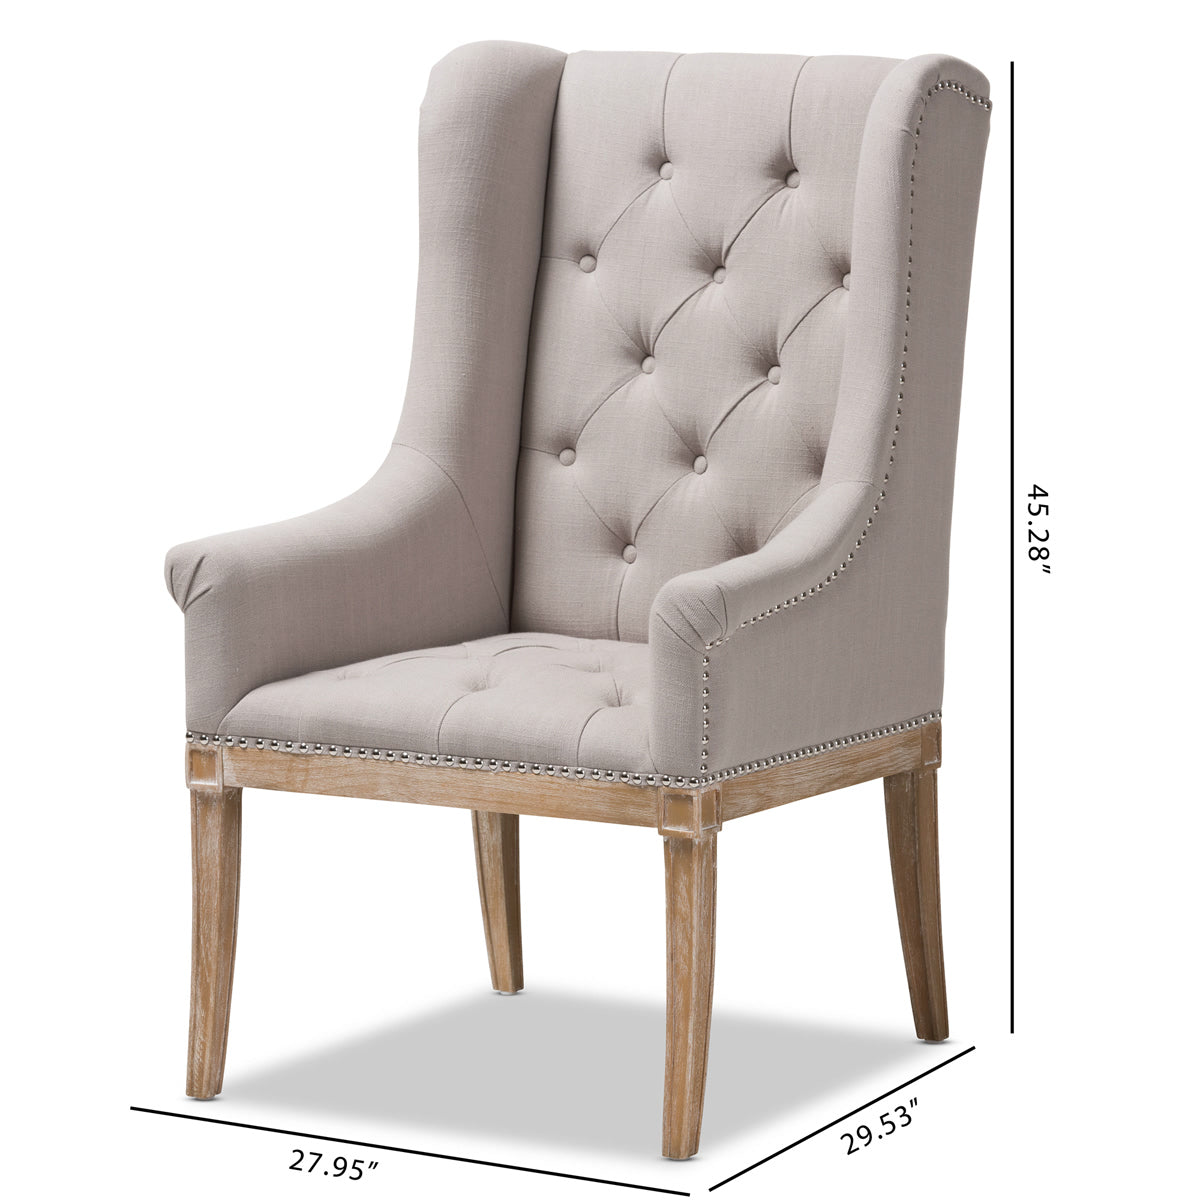 Baxton Studio Cedulie French Provincial Beige Fabric Upholstered Whitewashed Oak Lounge Chair Baxton Studio-chairs-Minimal And Modern - 2